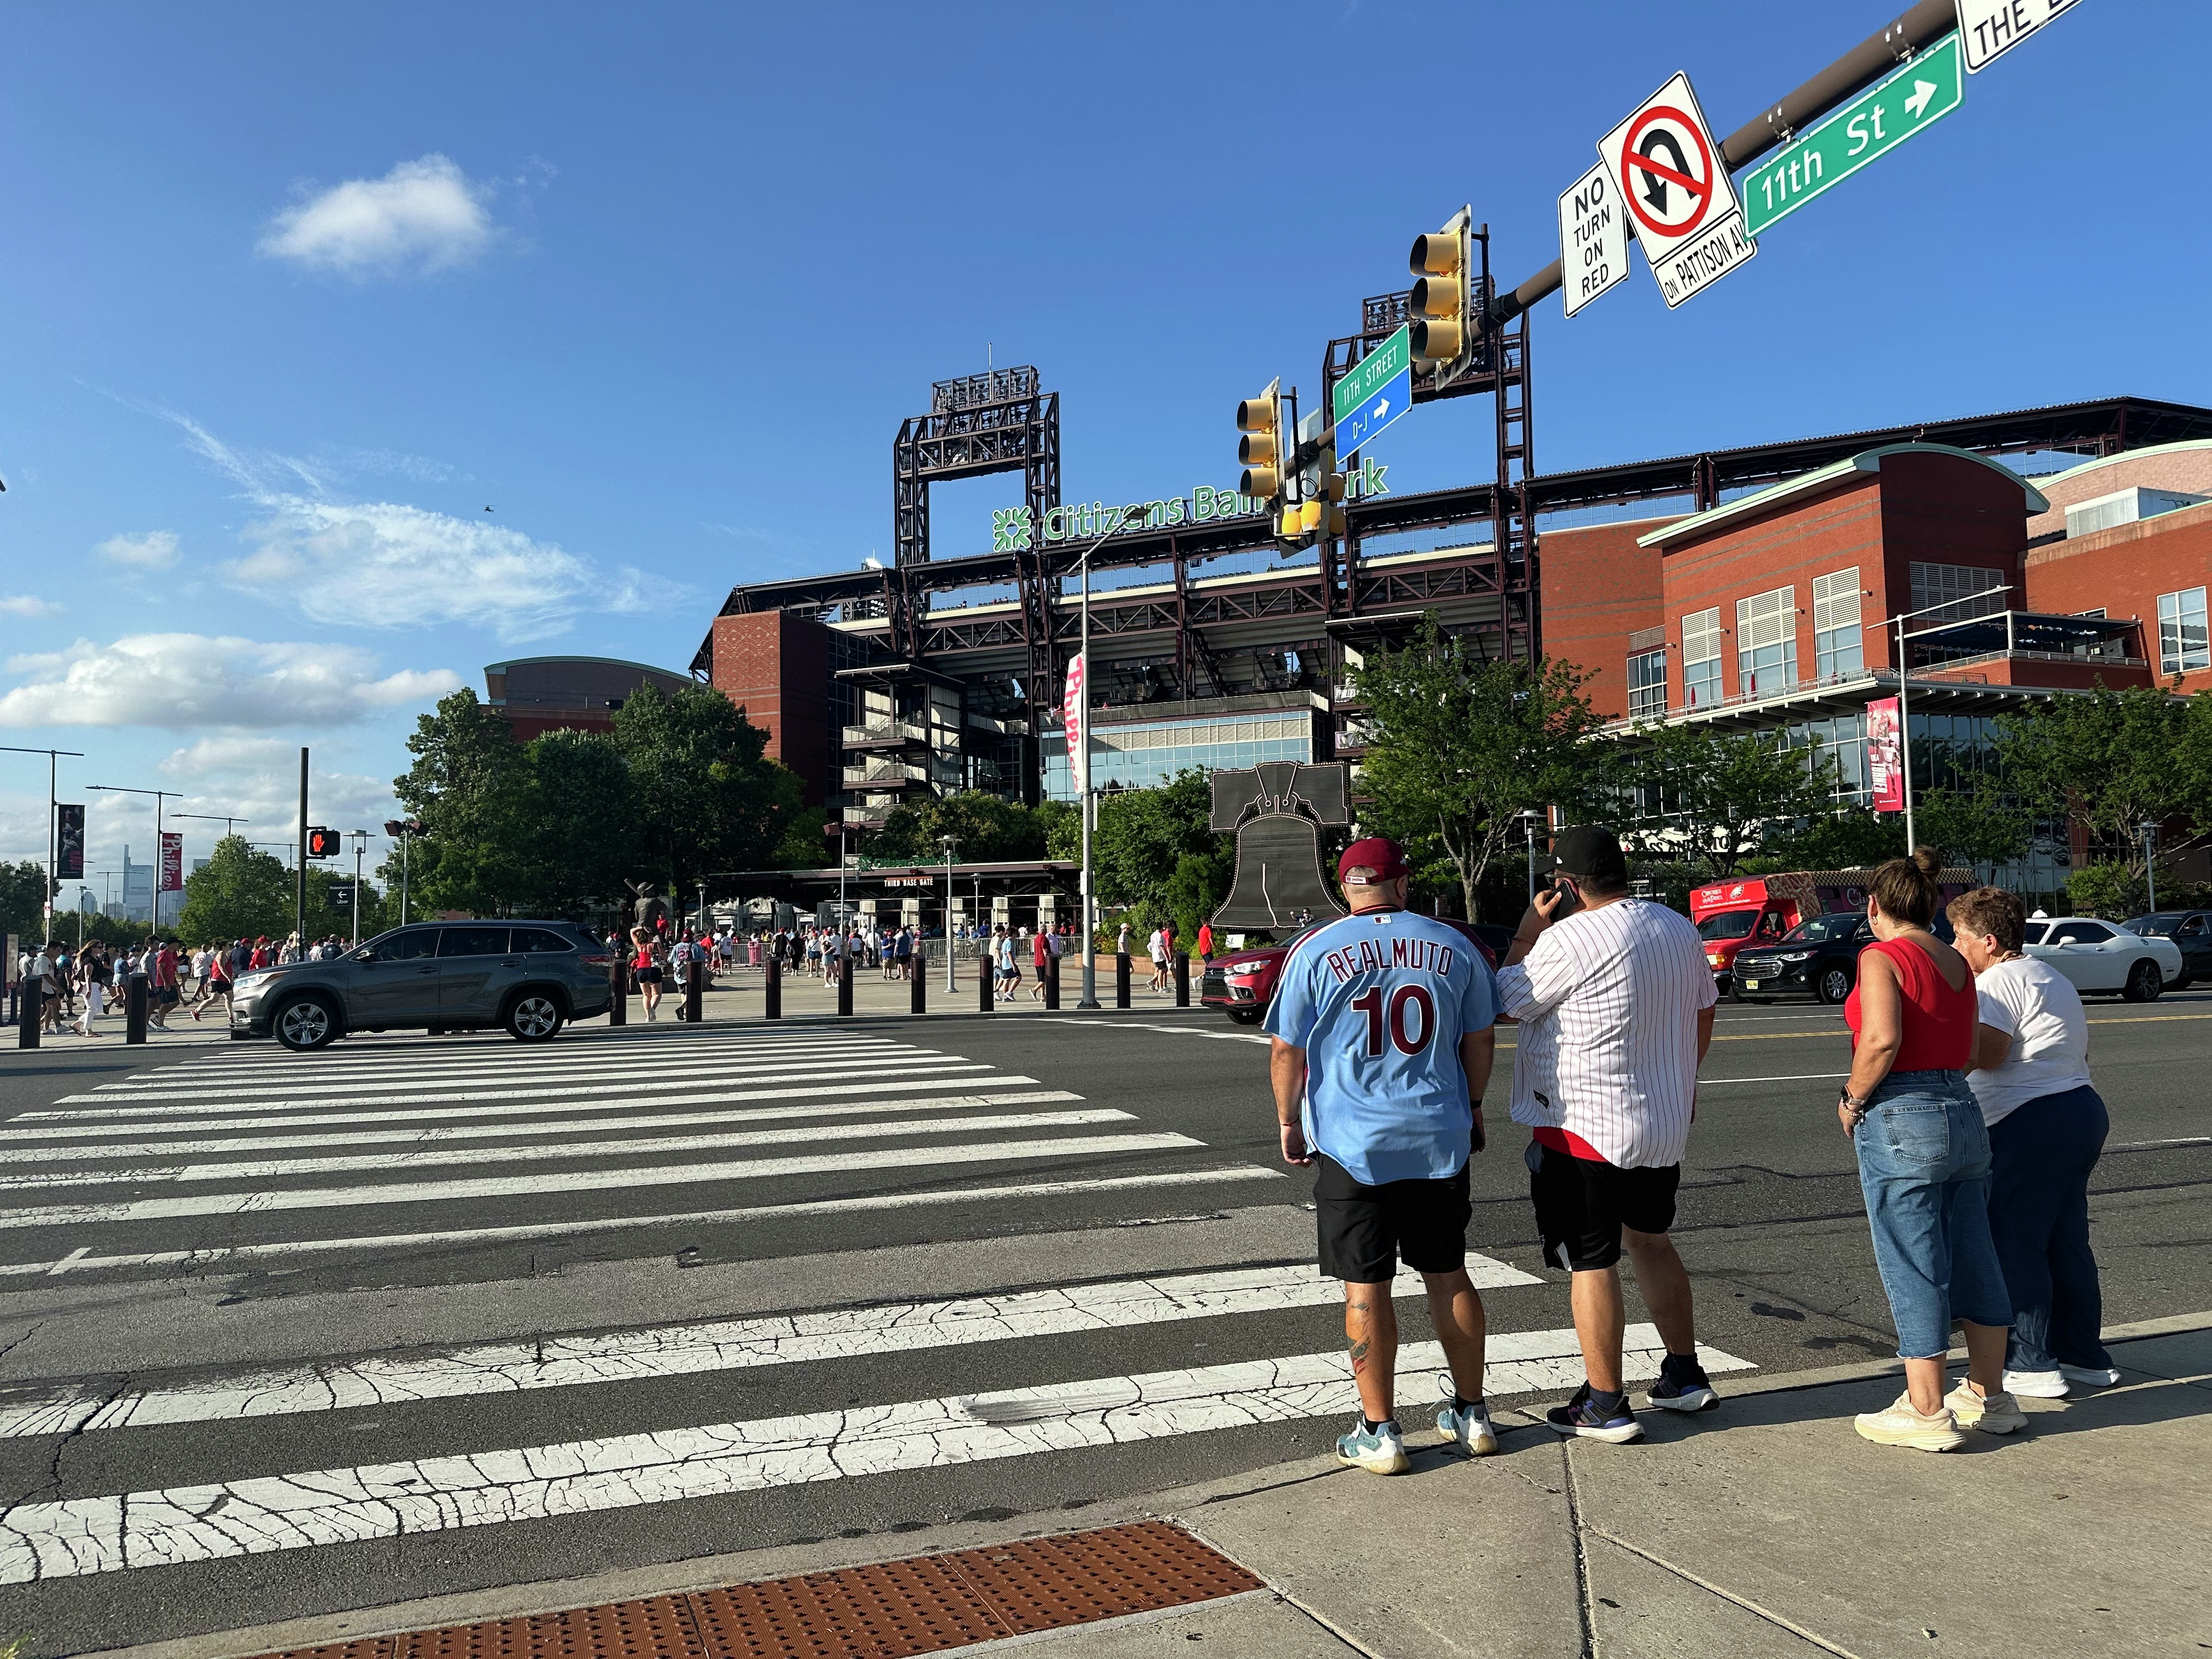 Phillies fans find brief reprieve from excessive heat at Citizens Bank Park